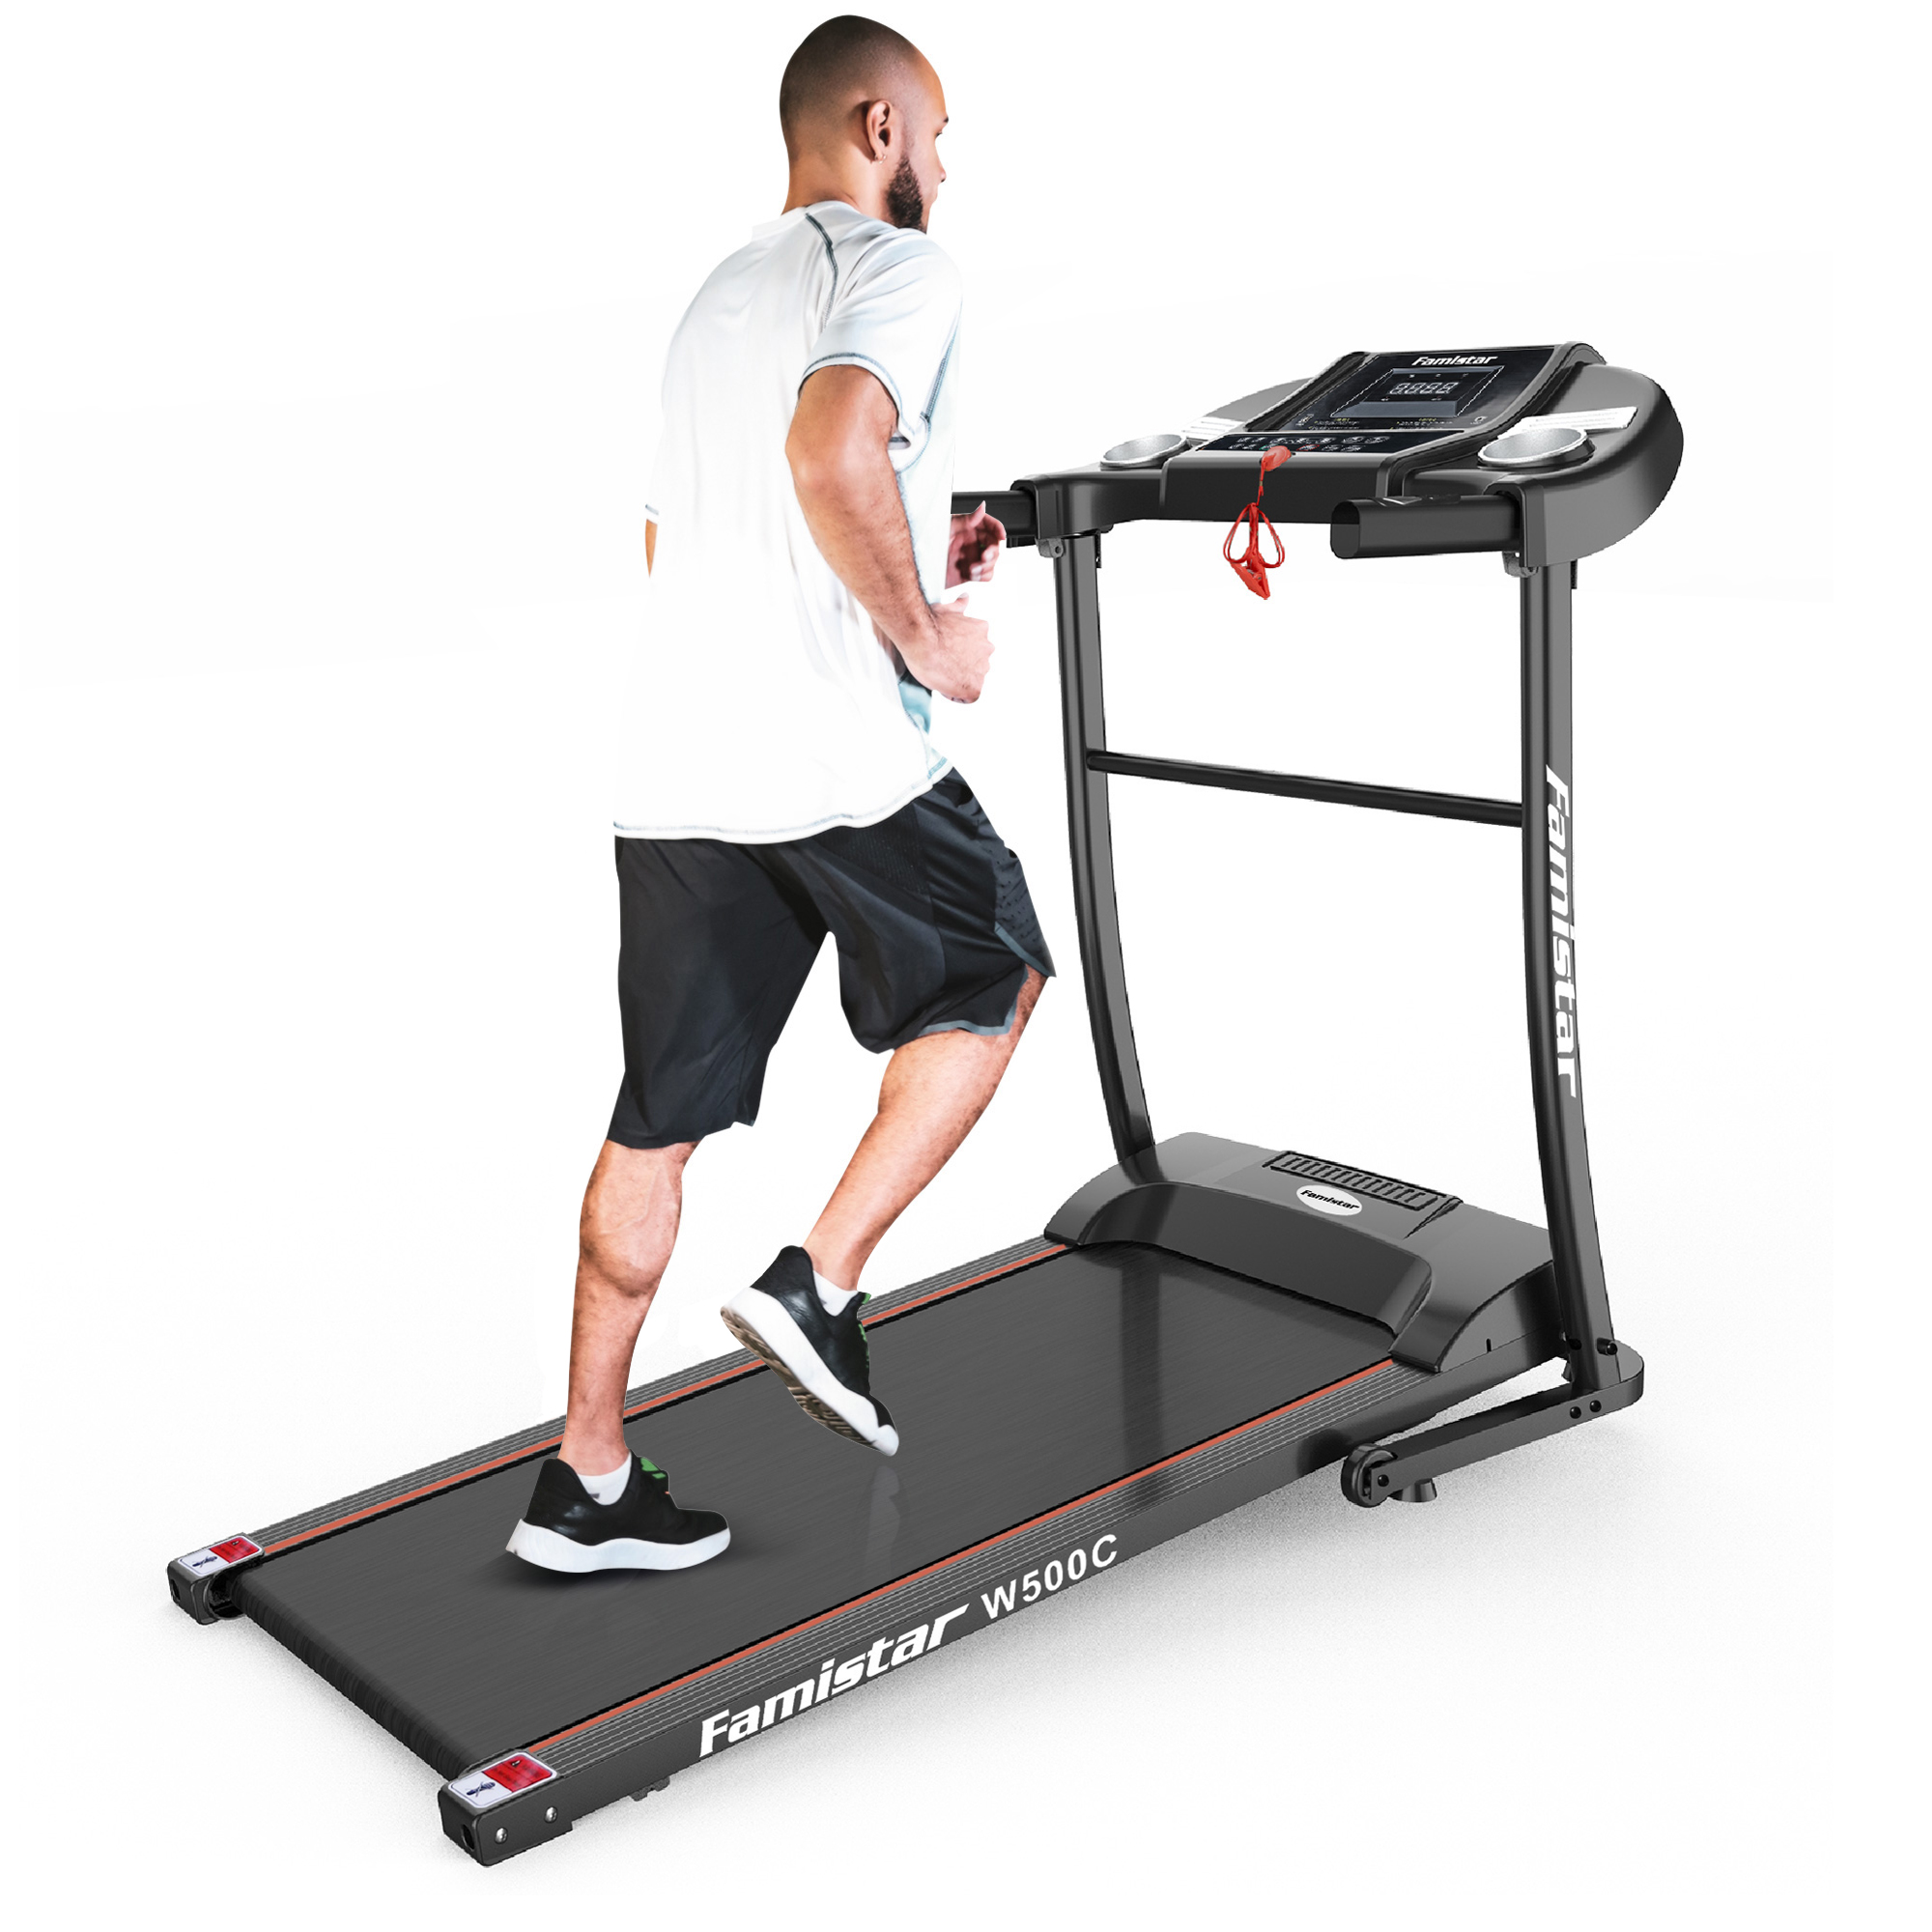 Famistar 12 Running Program Portable Folding Electric Treadmill, Easy Assembly Running Machine with Hand Pulse Sensor Cup Holder Safety Key, Free Knee Strap Gift Included, W500C - image 5 of 12